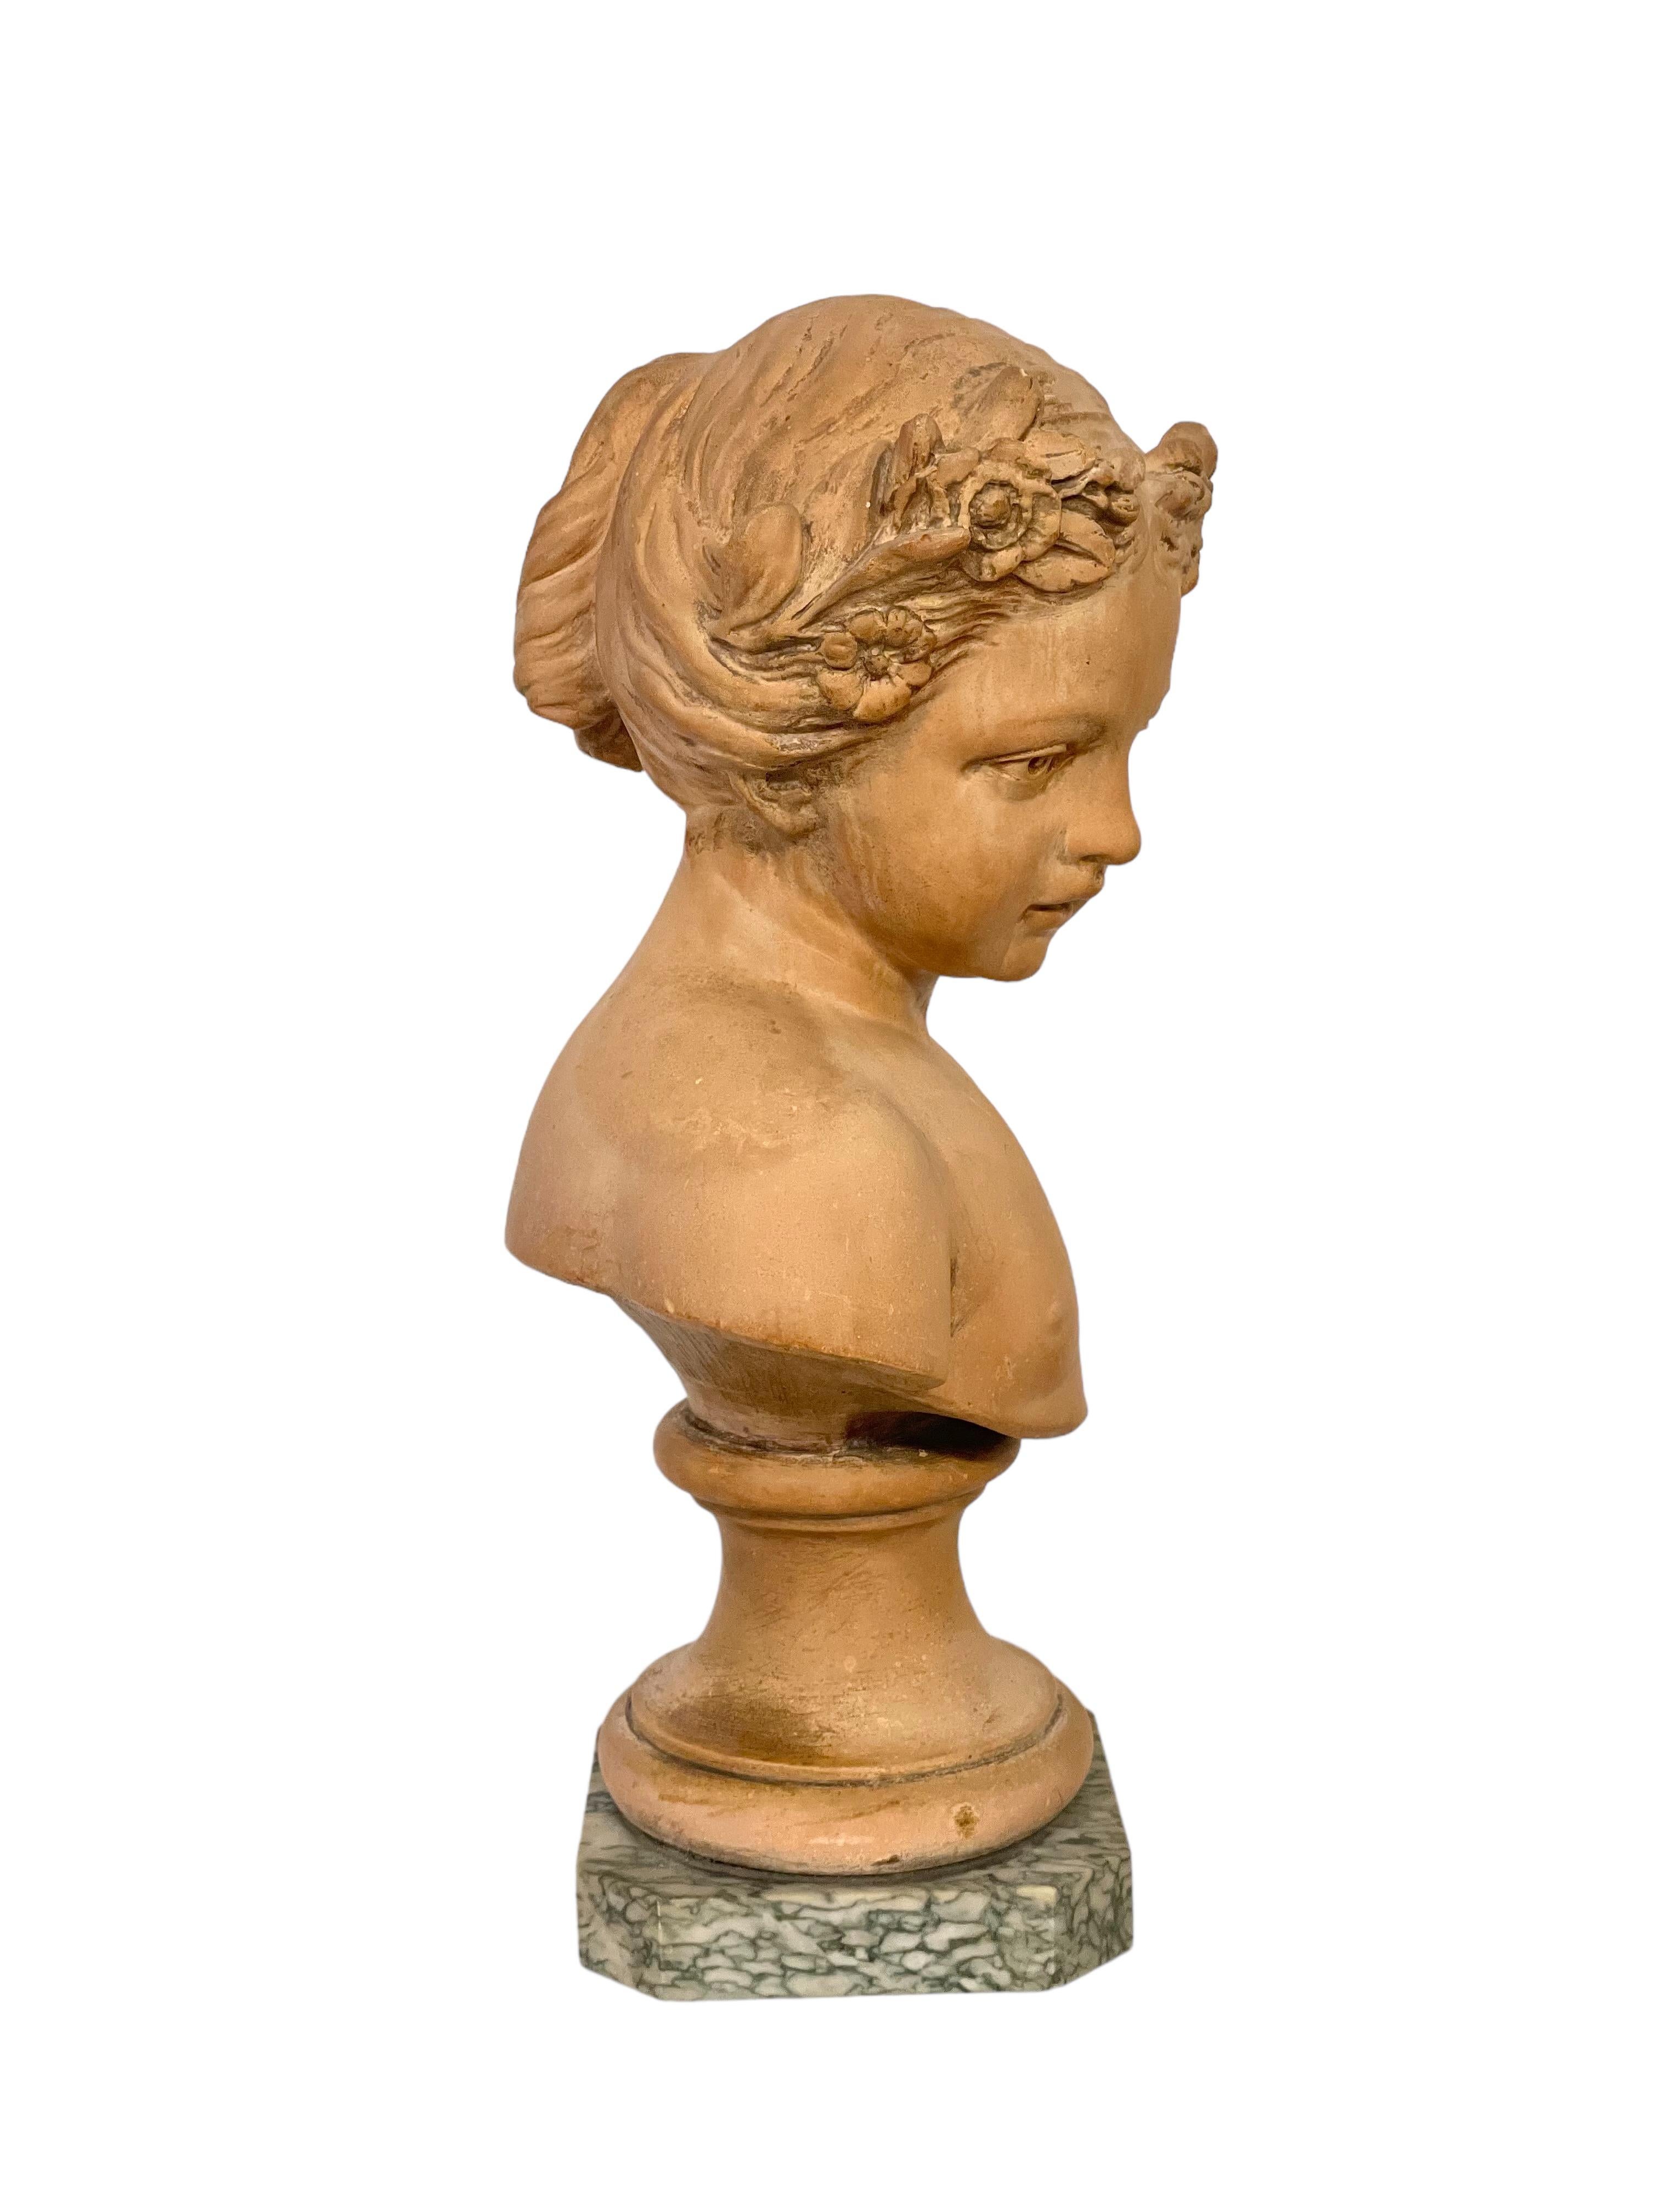 19th Century Terracotta Bust of Young Maiden in a Romantic Style For Sale 1